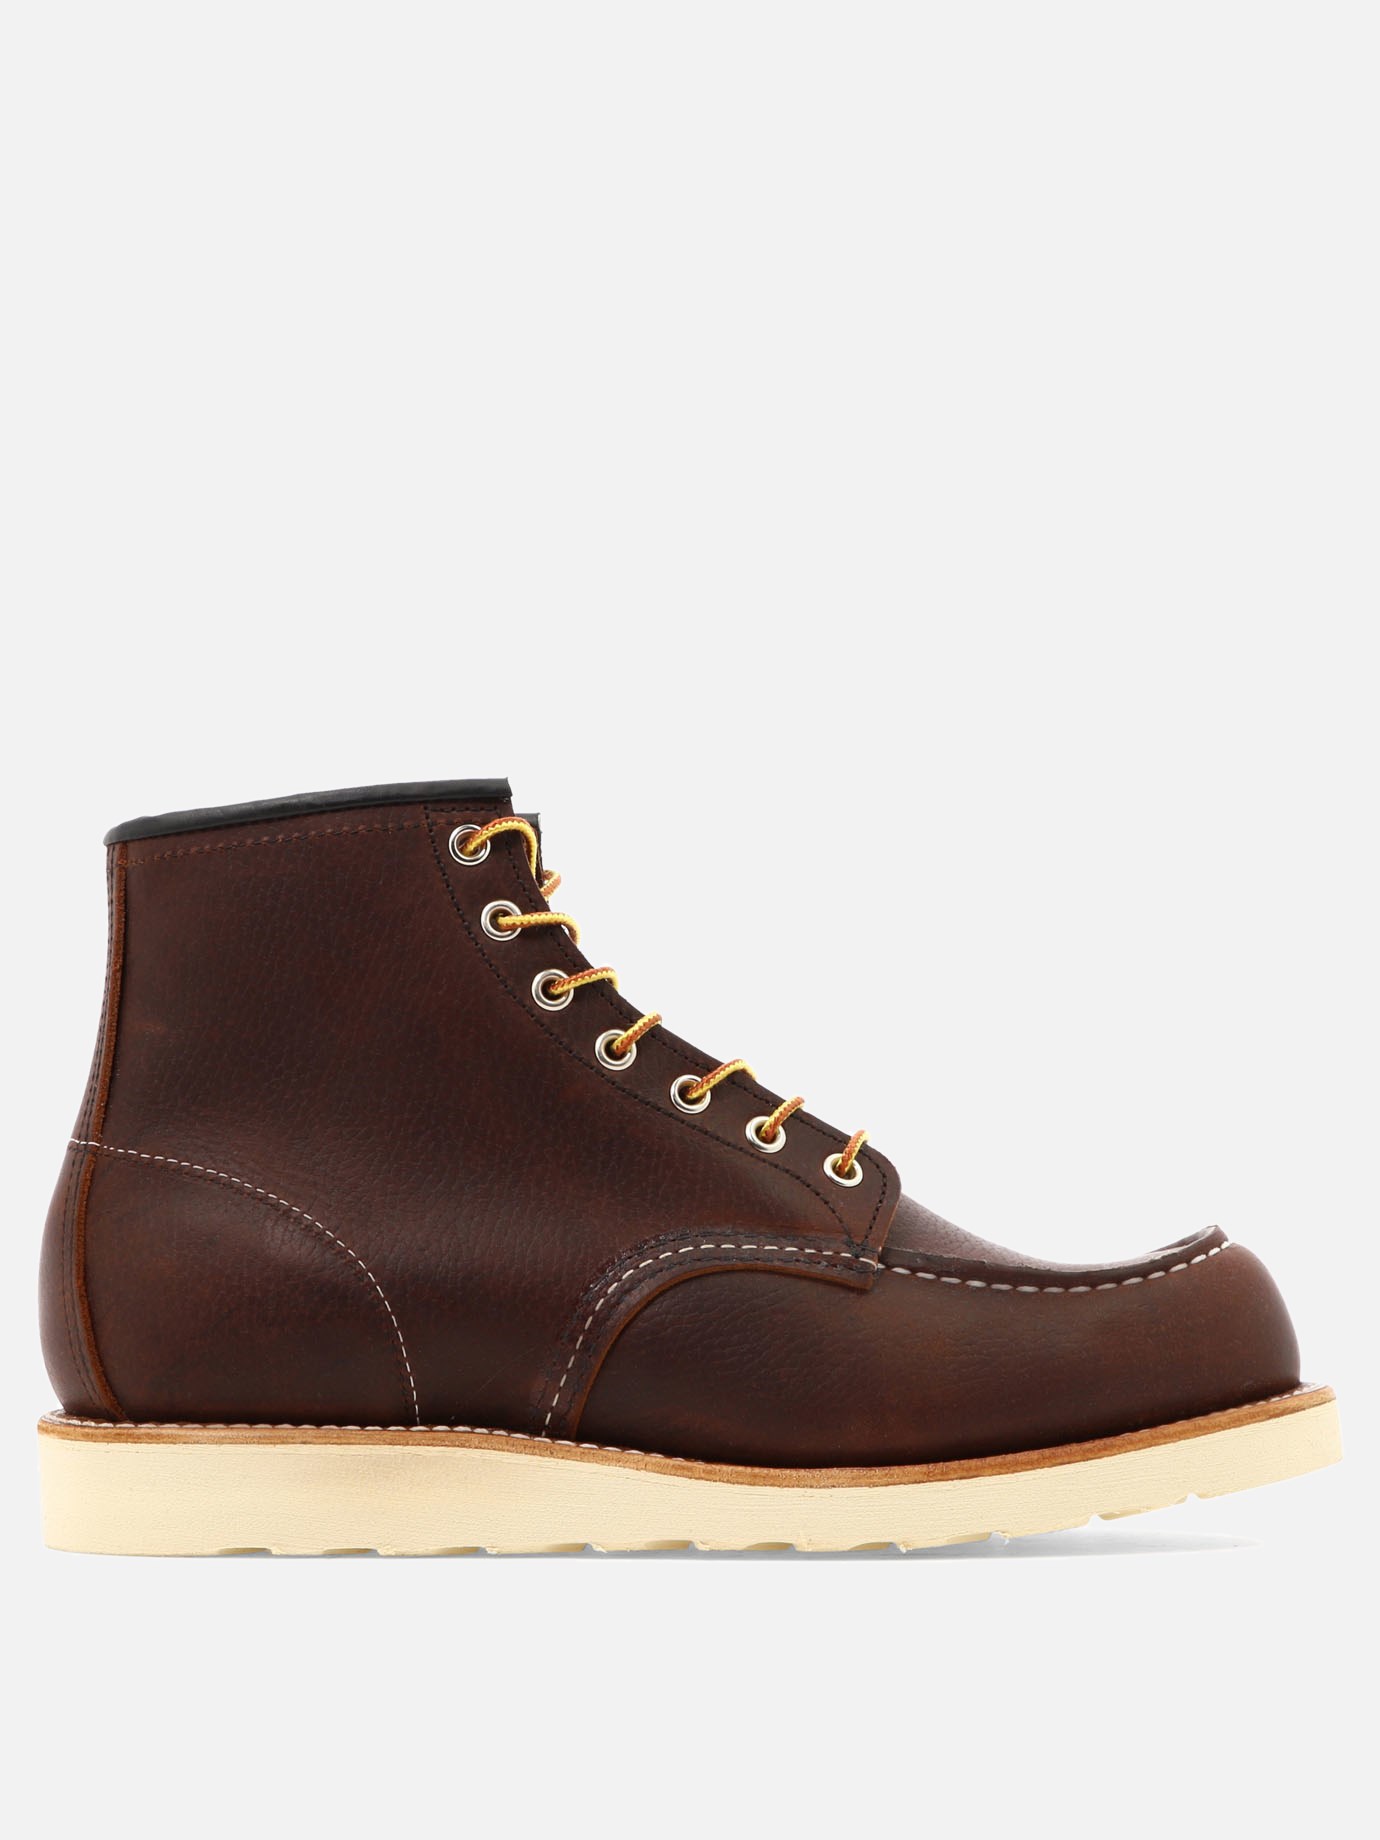  Classic Moc  ankle bootsby Red Wing Shoes - 3